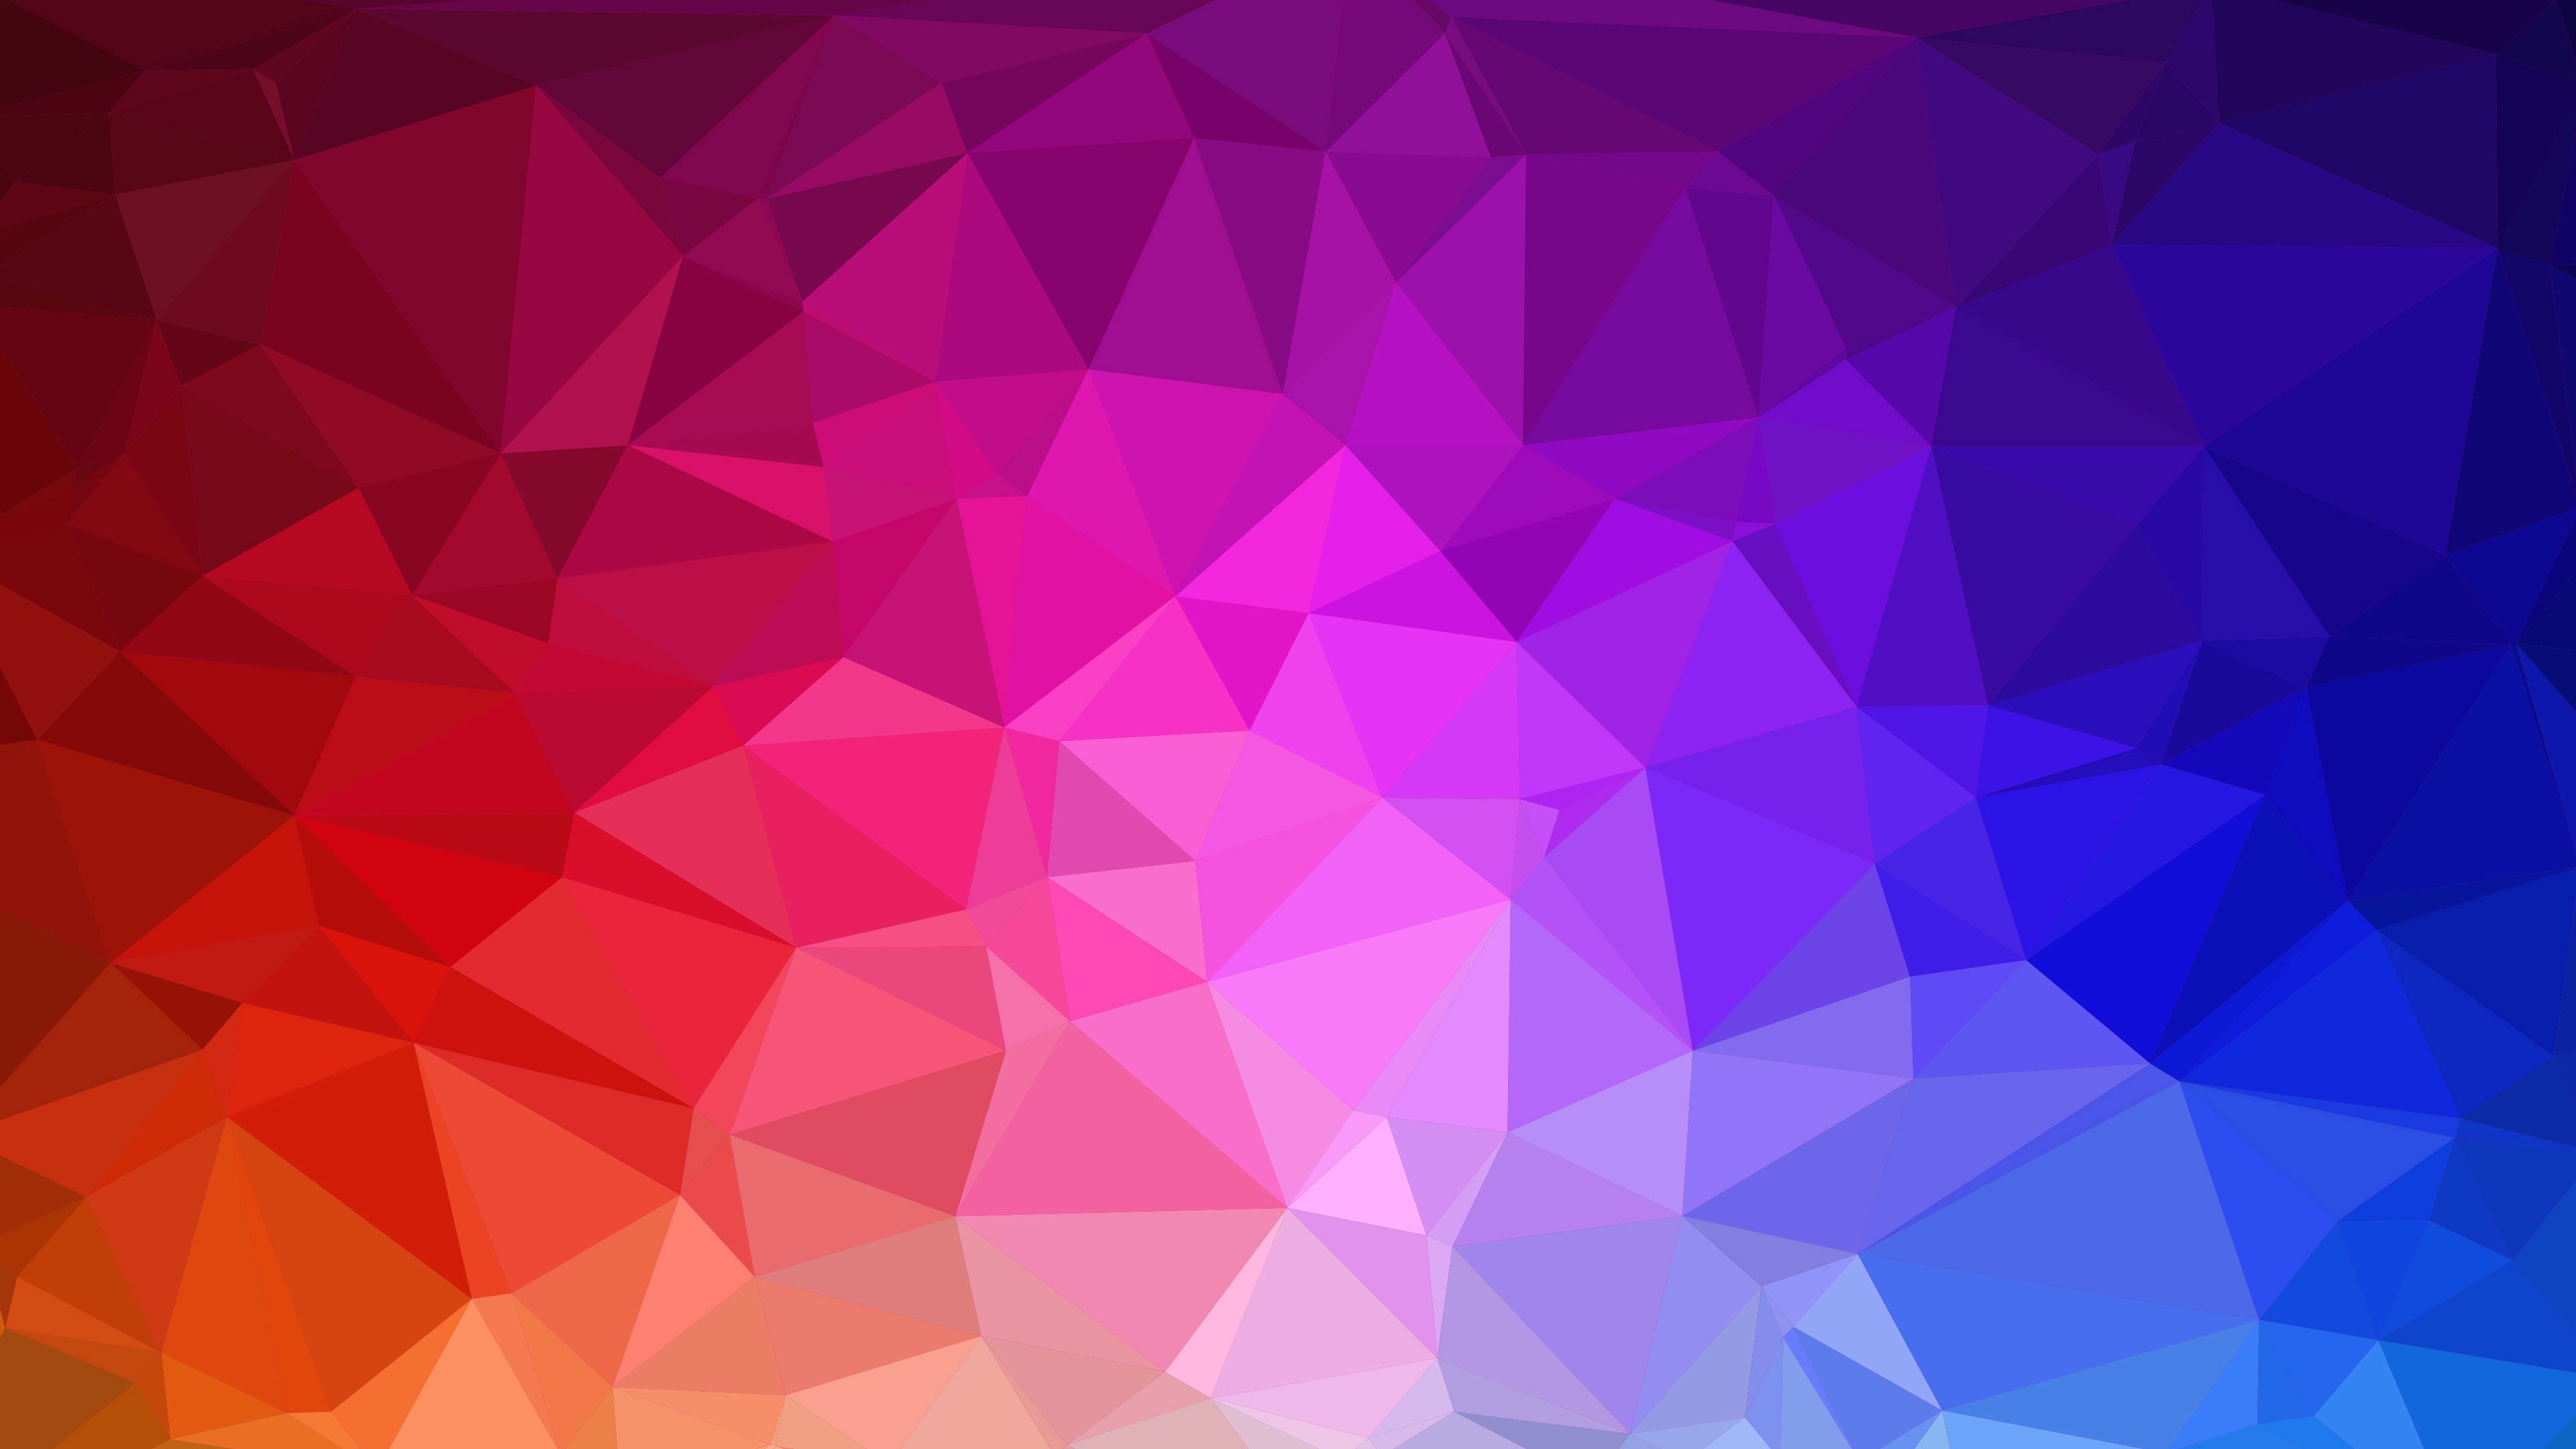 Rainbow Polygon Background Images  Free Photos PNG Stickers Wallpapers   Backgrounds  rawpixel